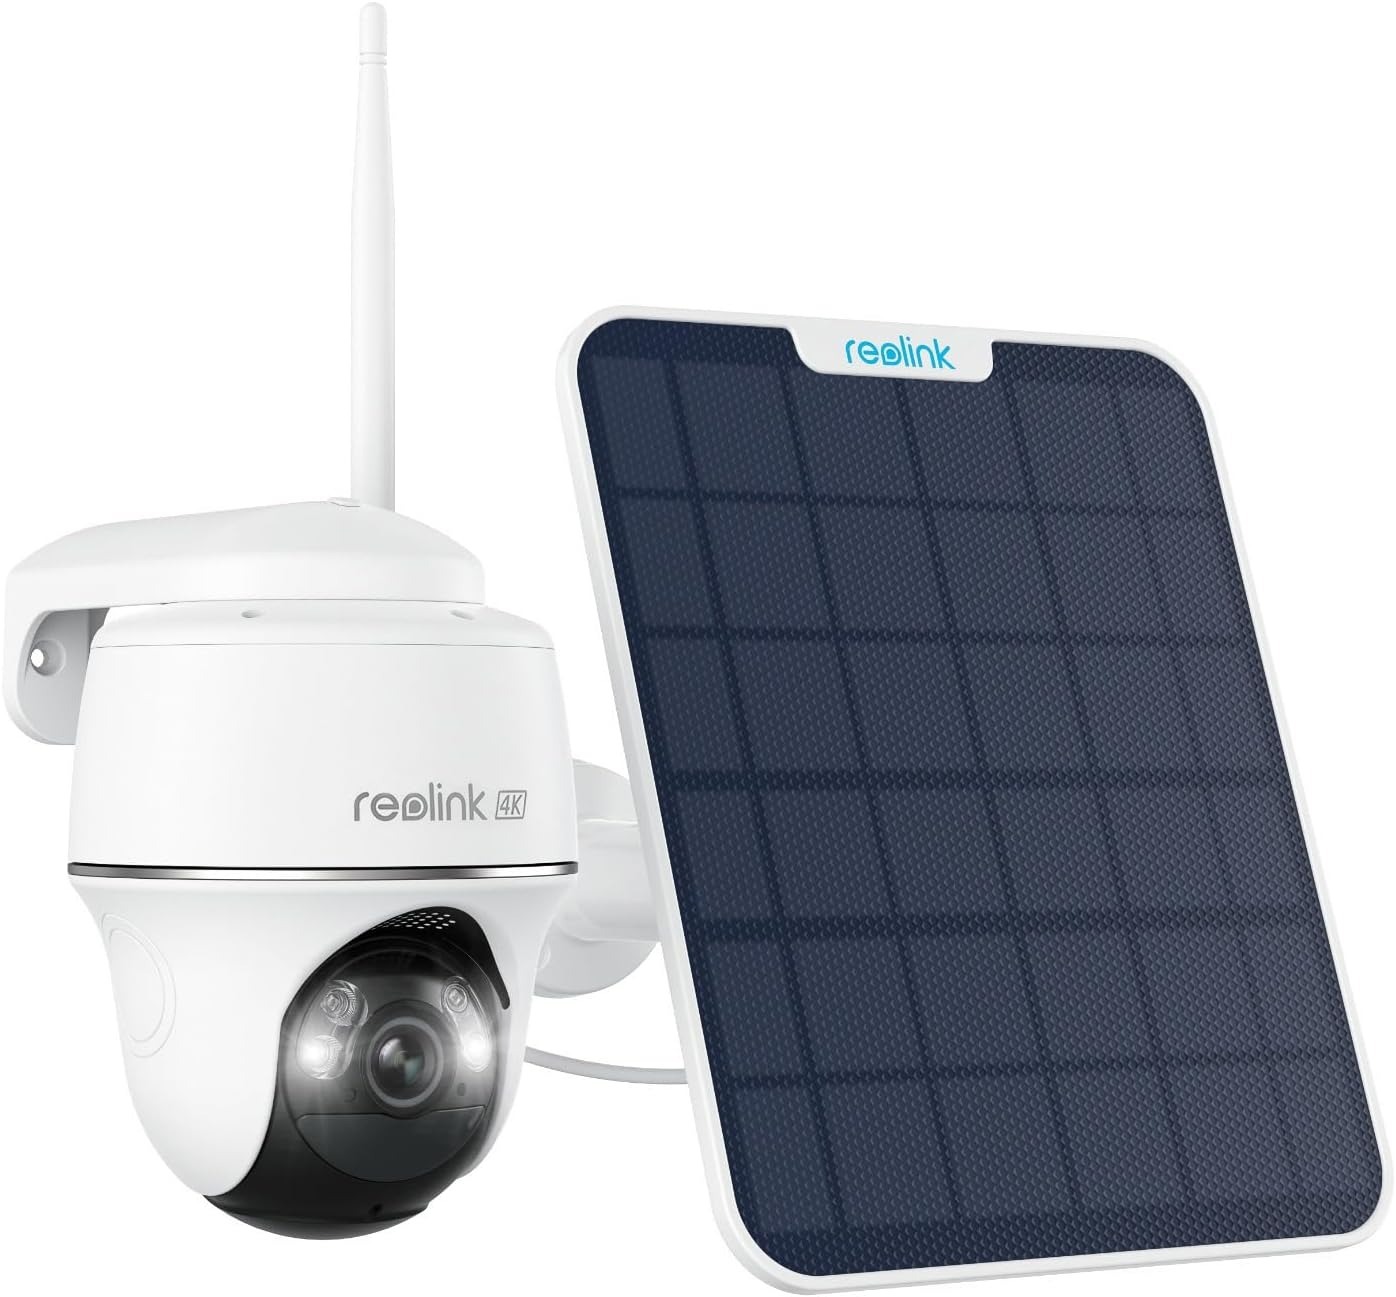 Reolink Argus PT Ultra + 6W Solar Panel Smart 4K 5/2.4GHz WiFi Security Camera w/ Pan & Tilt, Spotlights, Person/Vehicle Detection $130 + Free Shipping